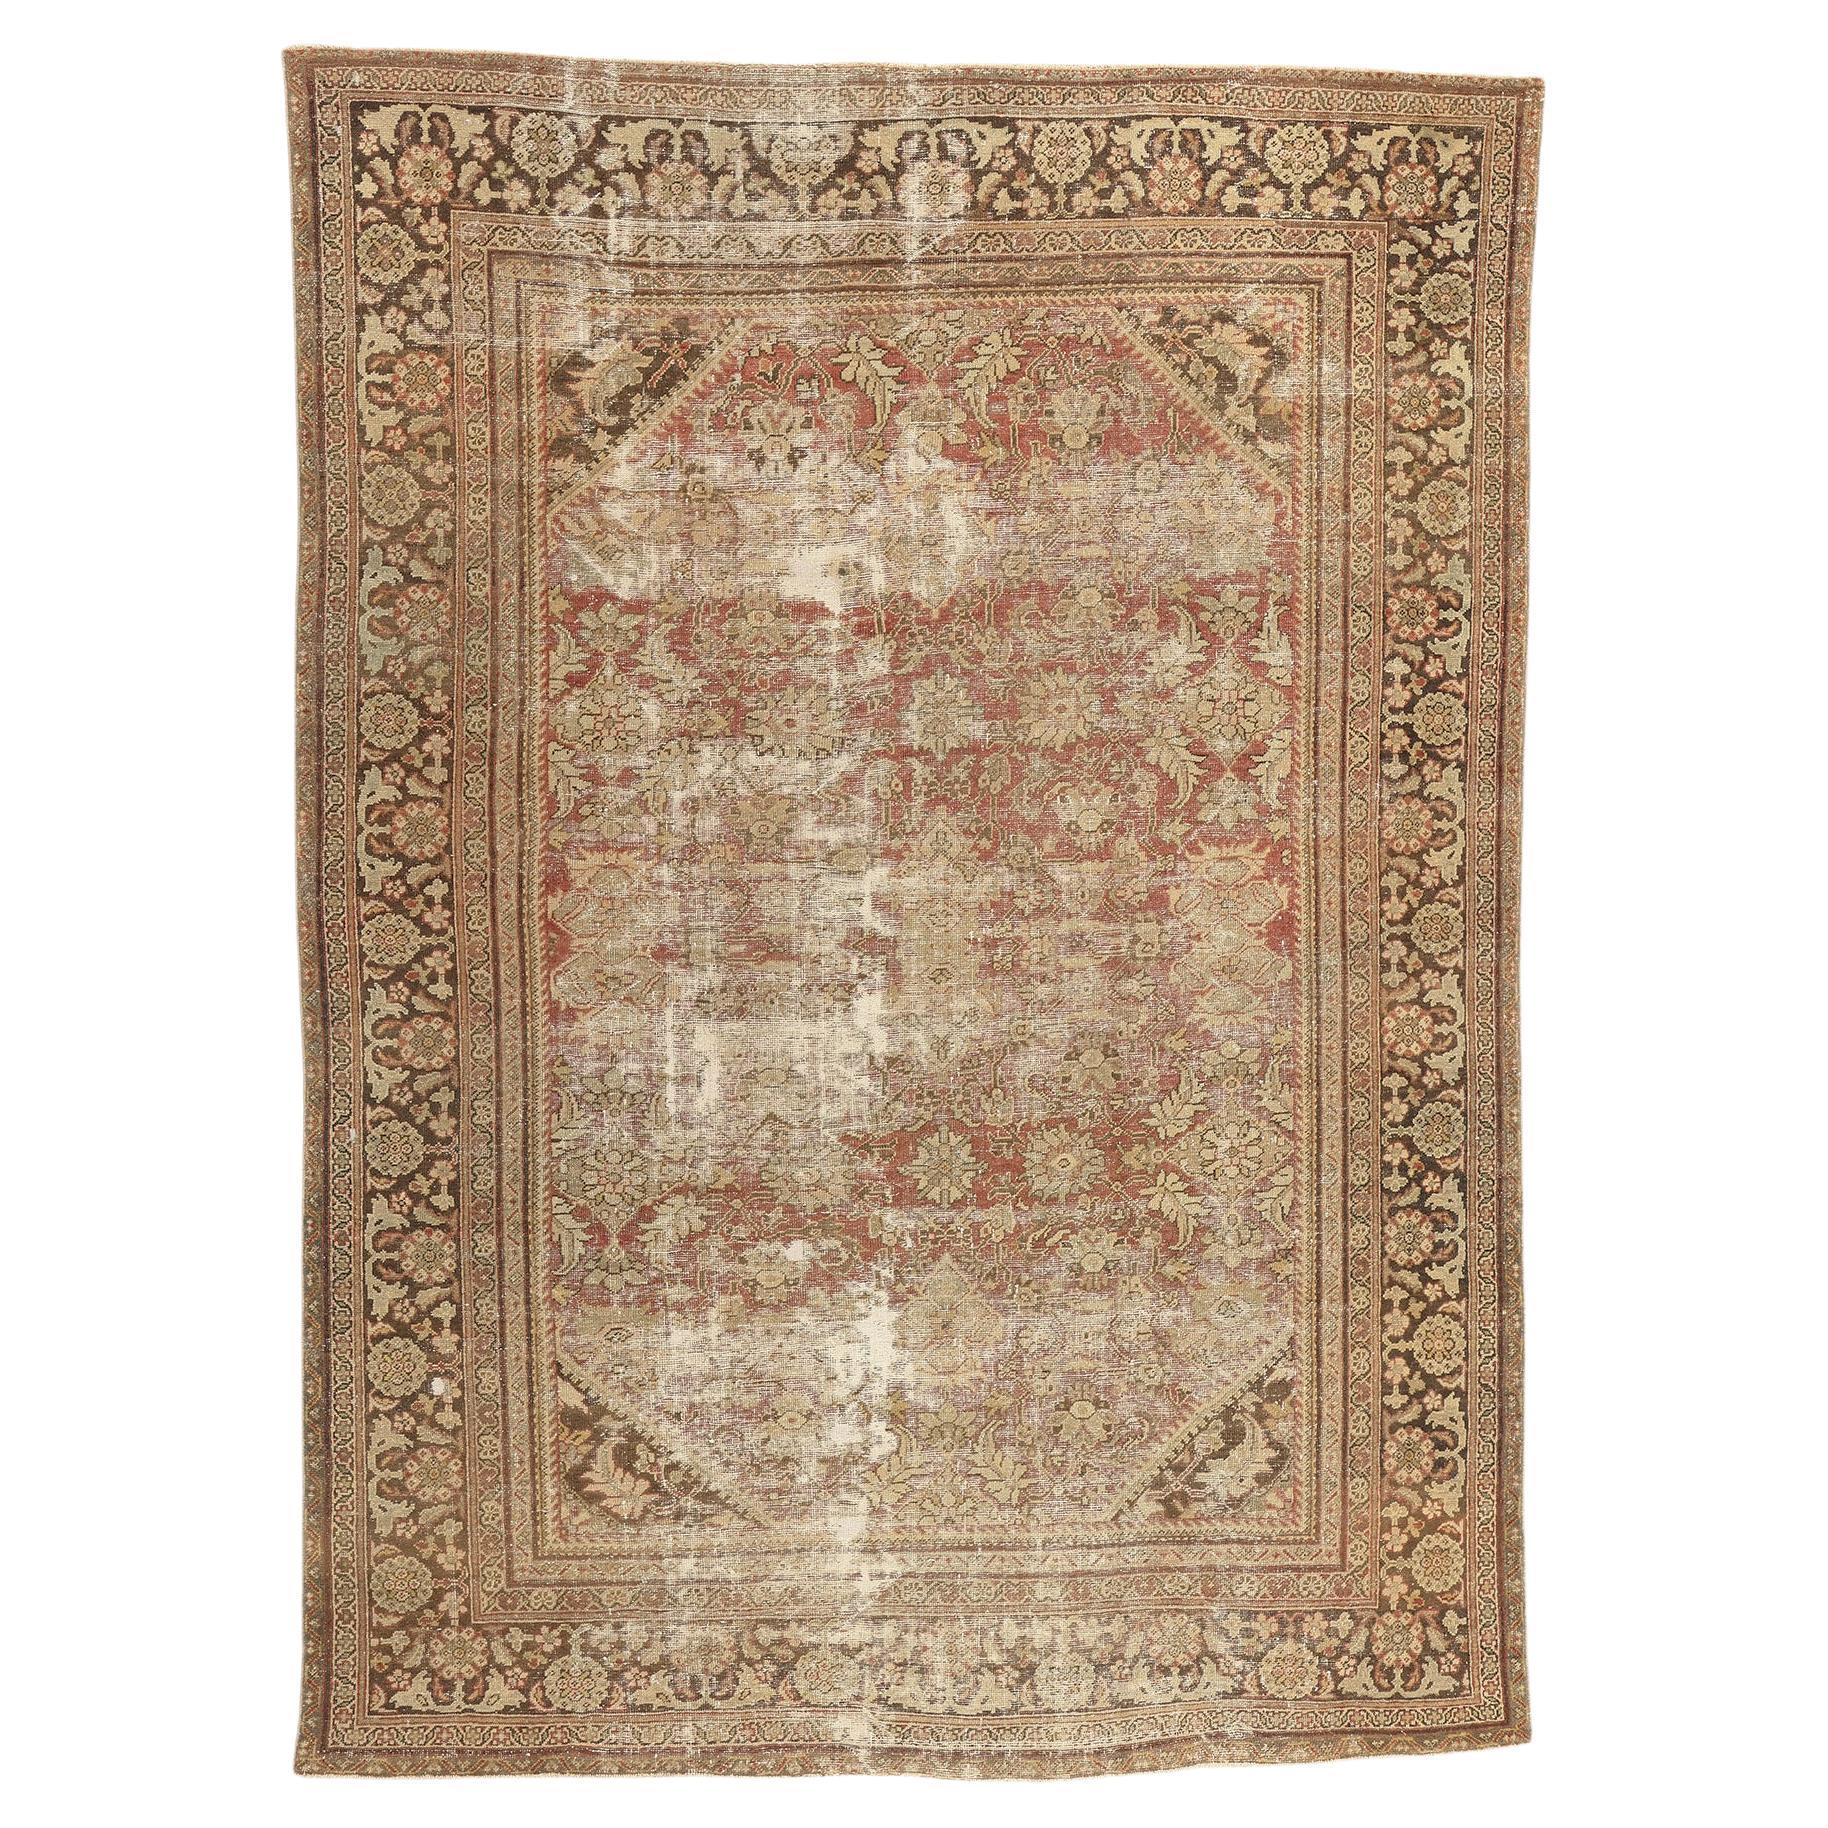 Late 19th Century Distressed Antique Persian Mahal Rug